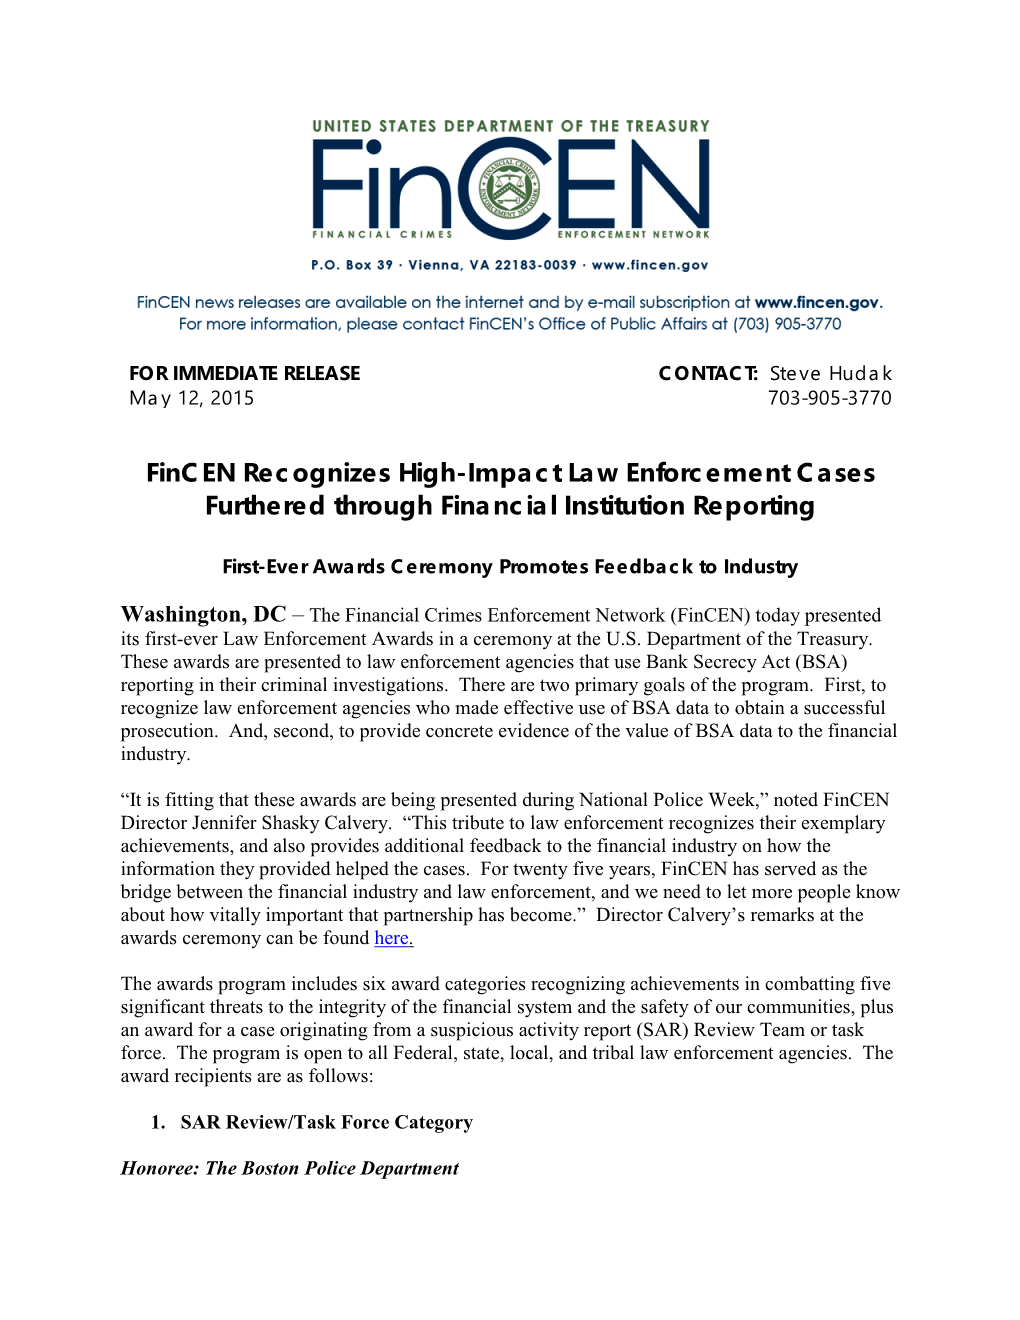 Fincen Recognizes High-Impact Law Enforcement Cases Furthered Through Financial Institution Reporting